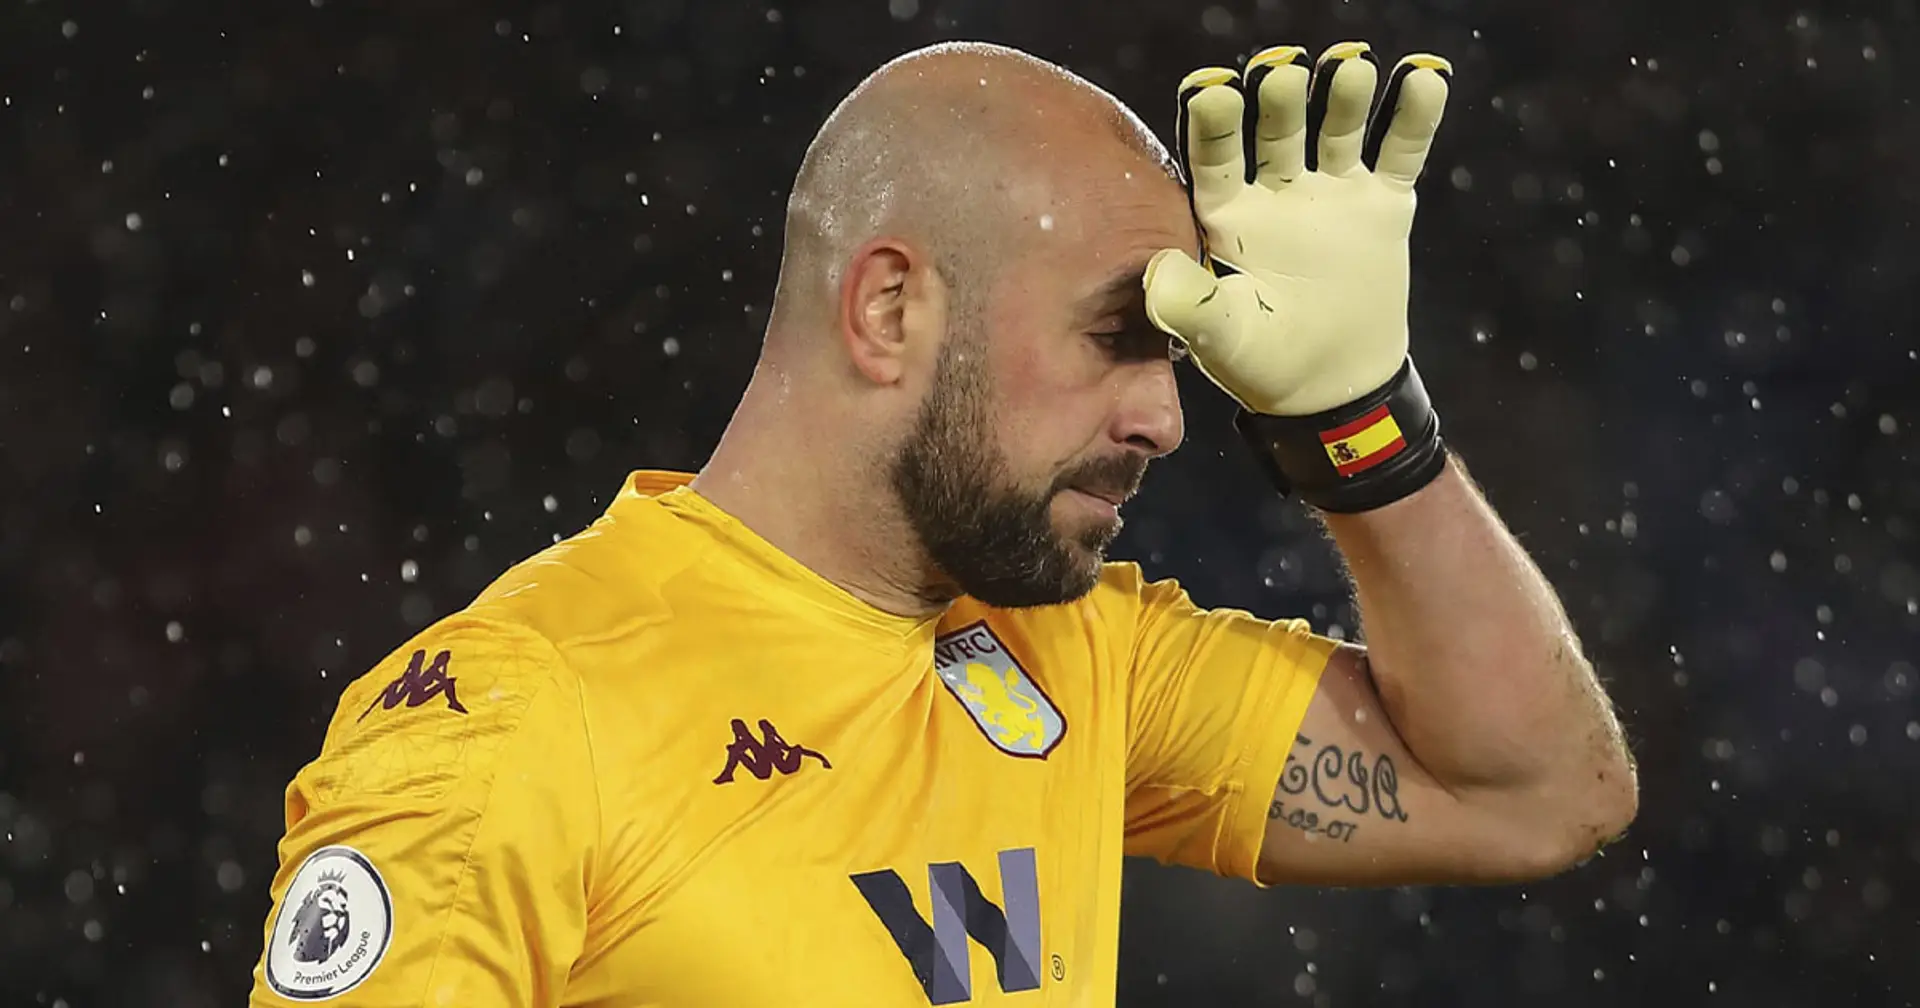 'For 25 minutes, I ran out of oxygen. It was worst moment of my life': Pepe Reina opens up on battle with coronavirus